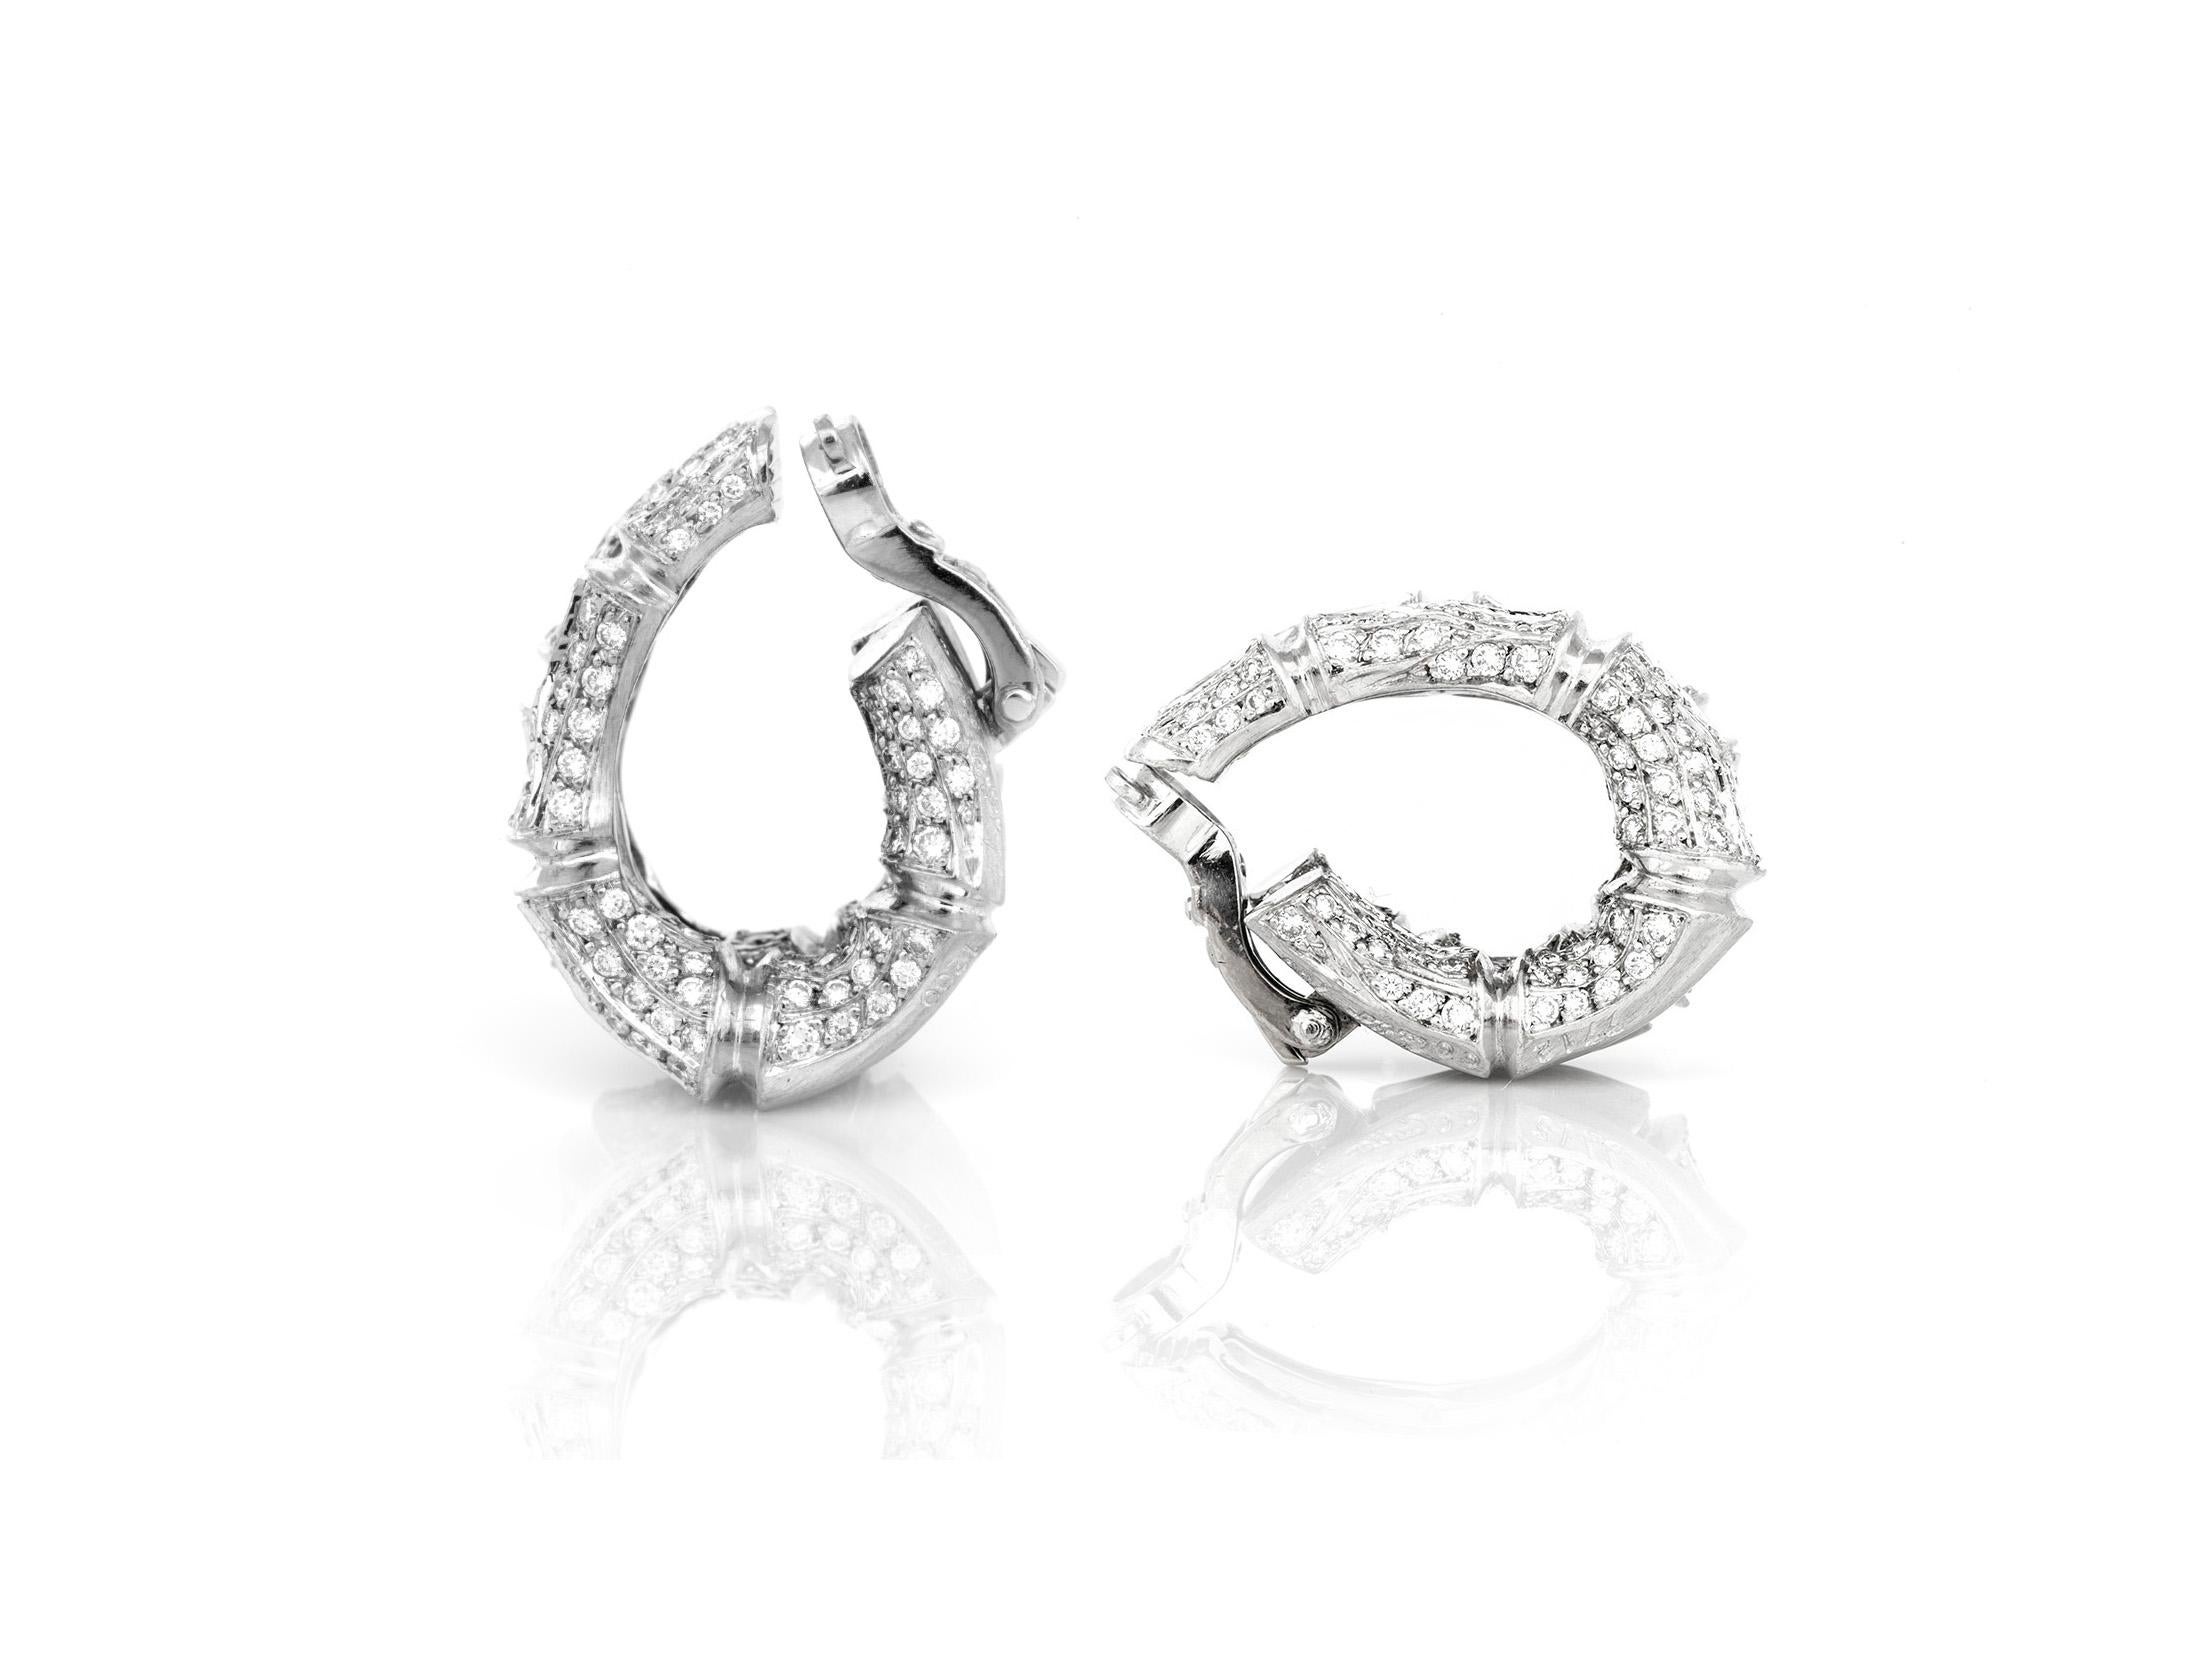 Finely crafted in 18k white gold and diamonds.
Clip-on huggie earrings
Signed by Cartier